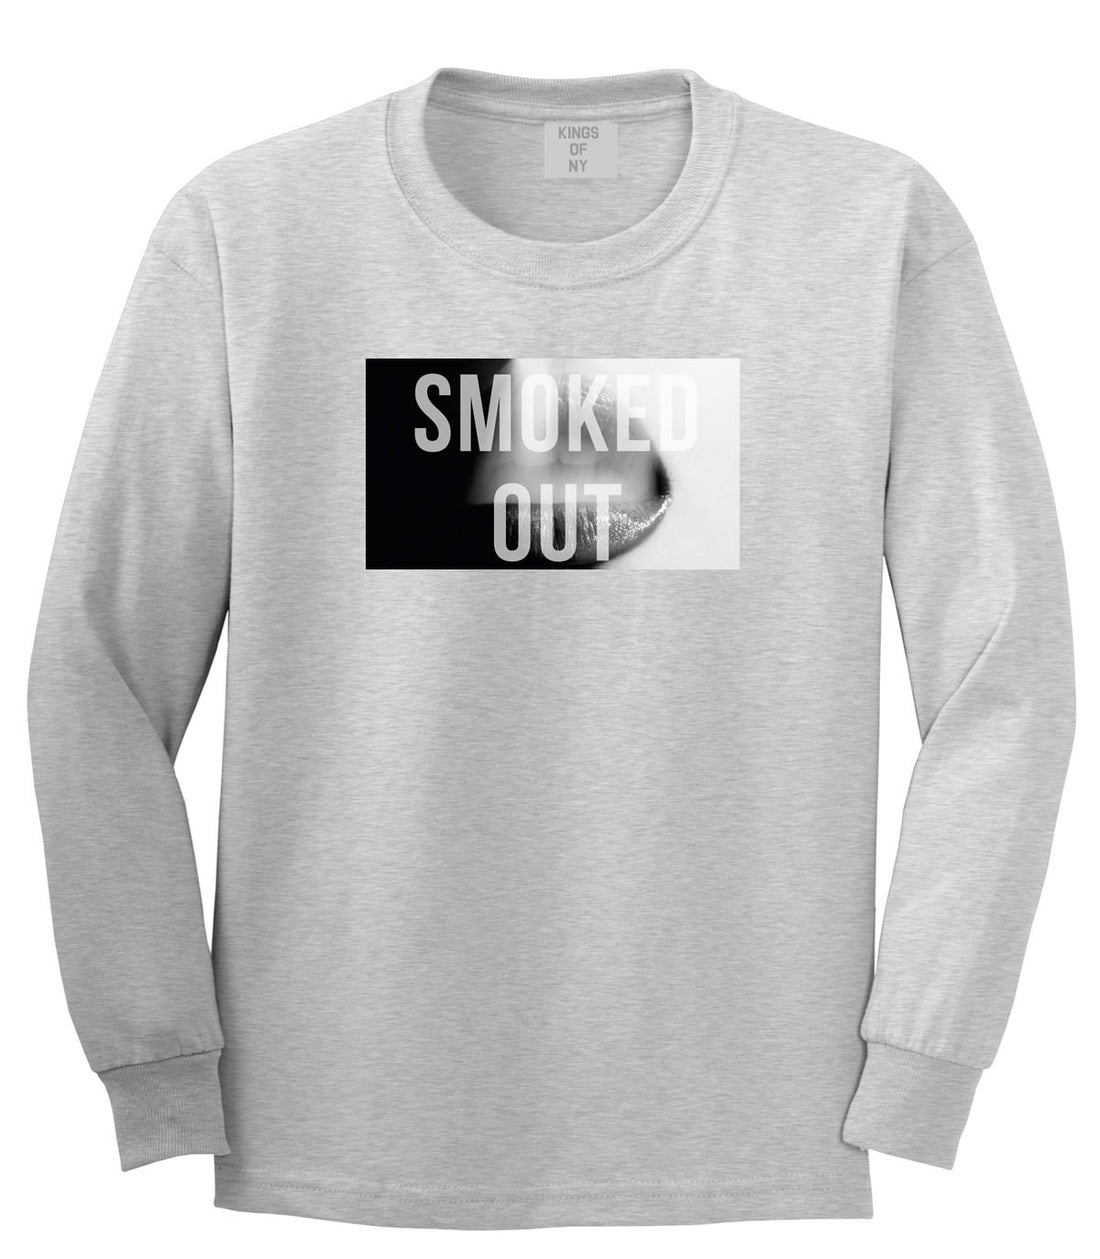 Smoked Out Weed Marijuana Girls Pot New York Long Sleeve Boys Kids T-Shirt In Grey by Kings Of NY